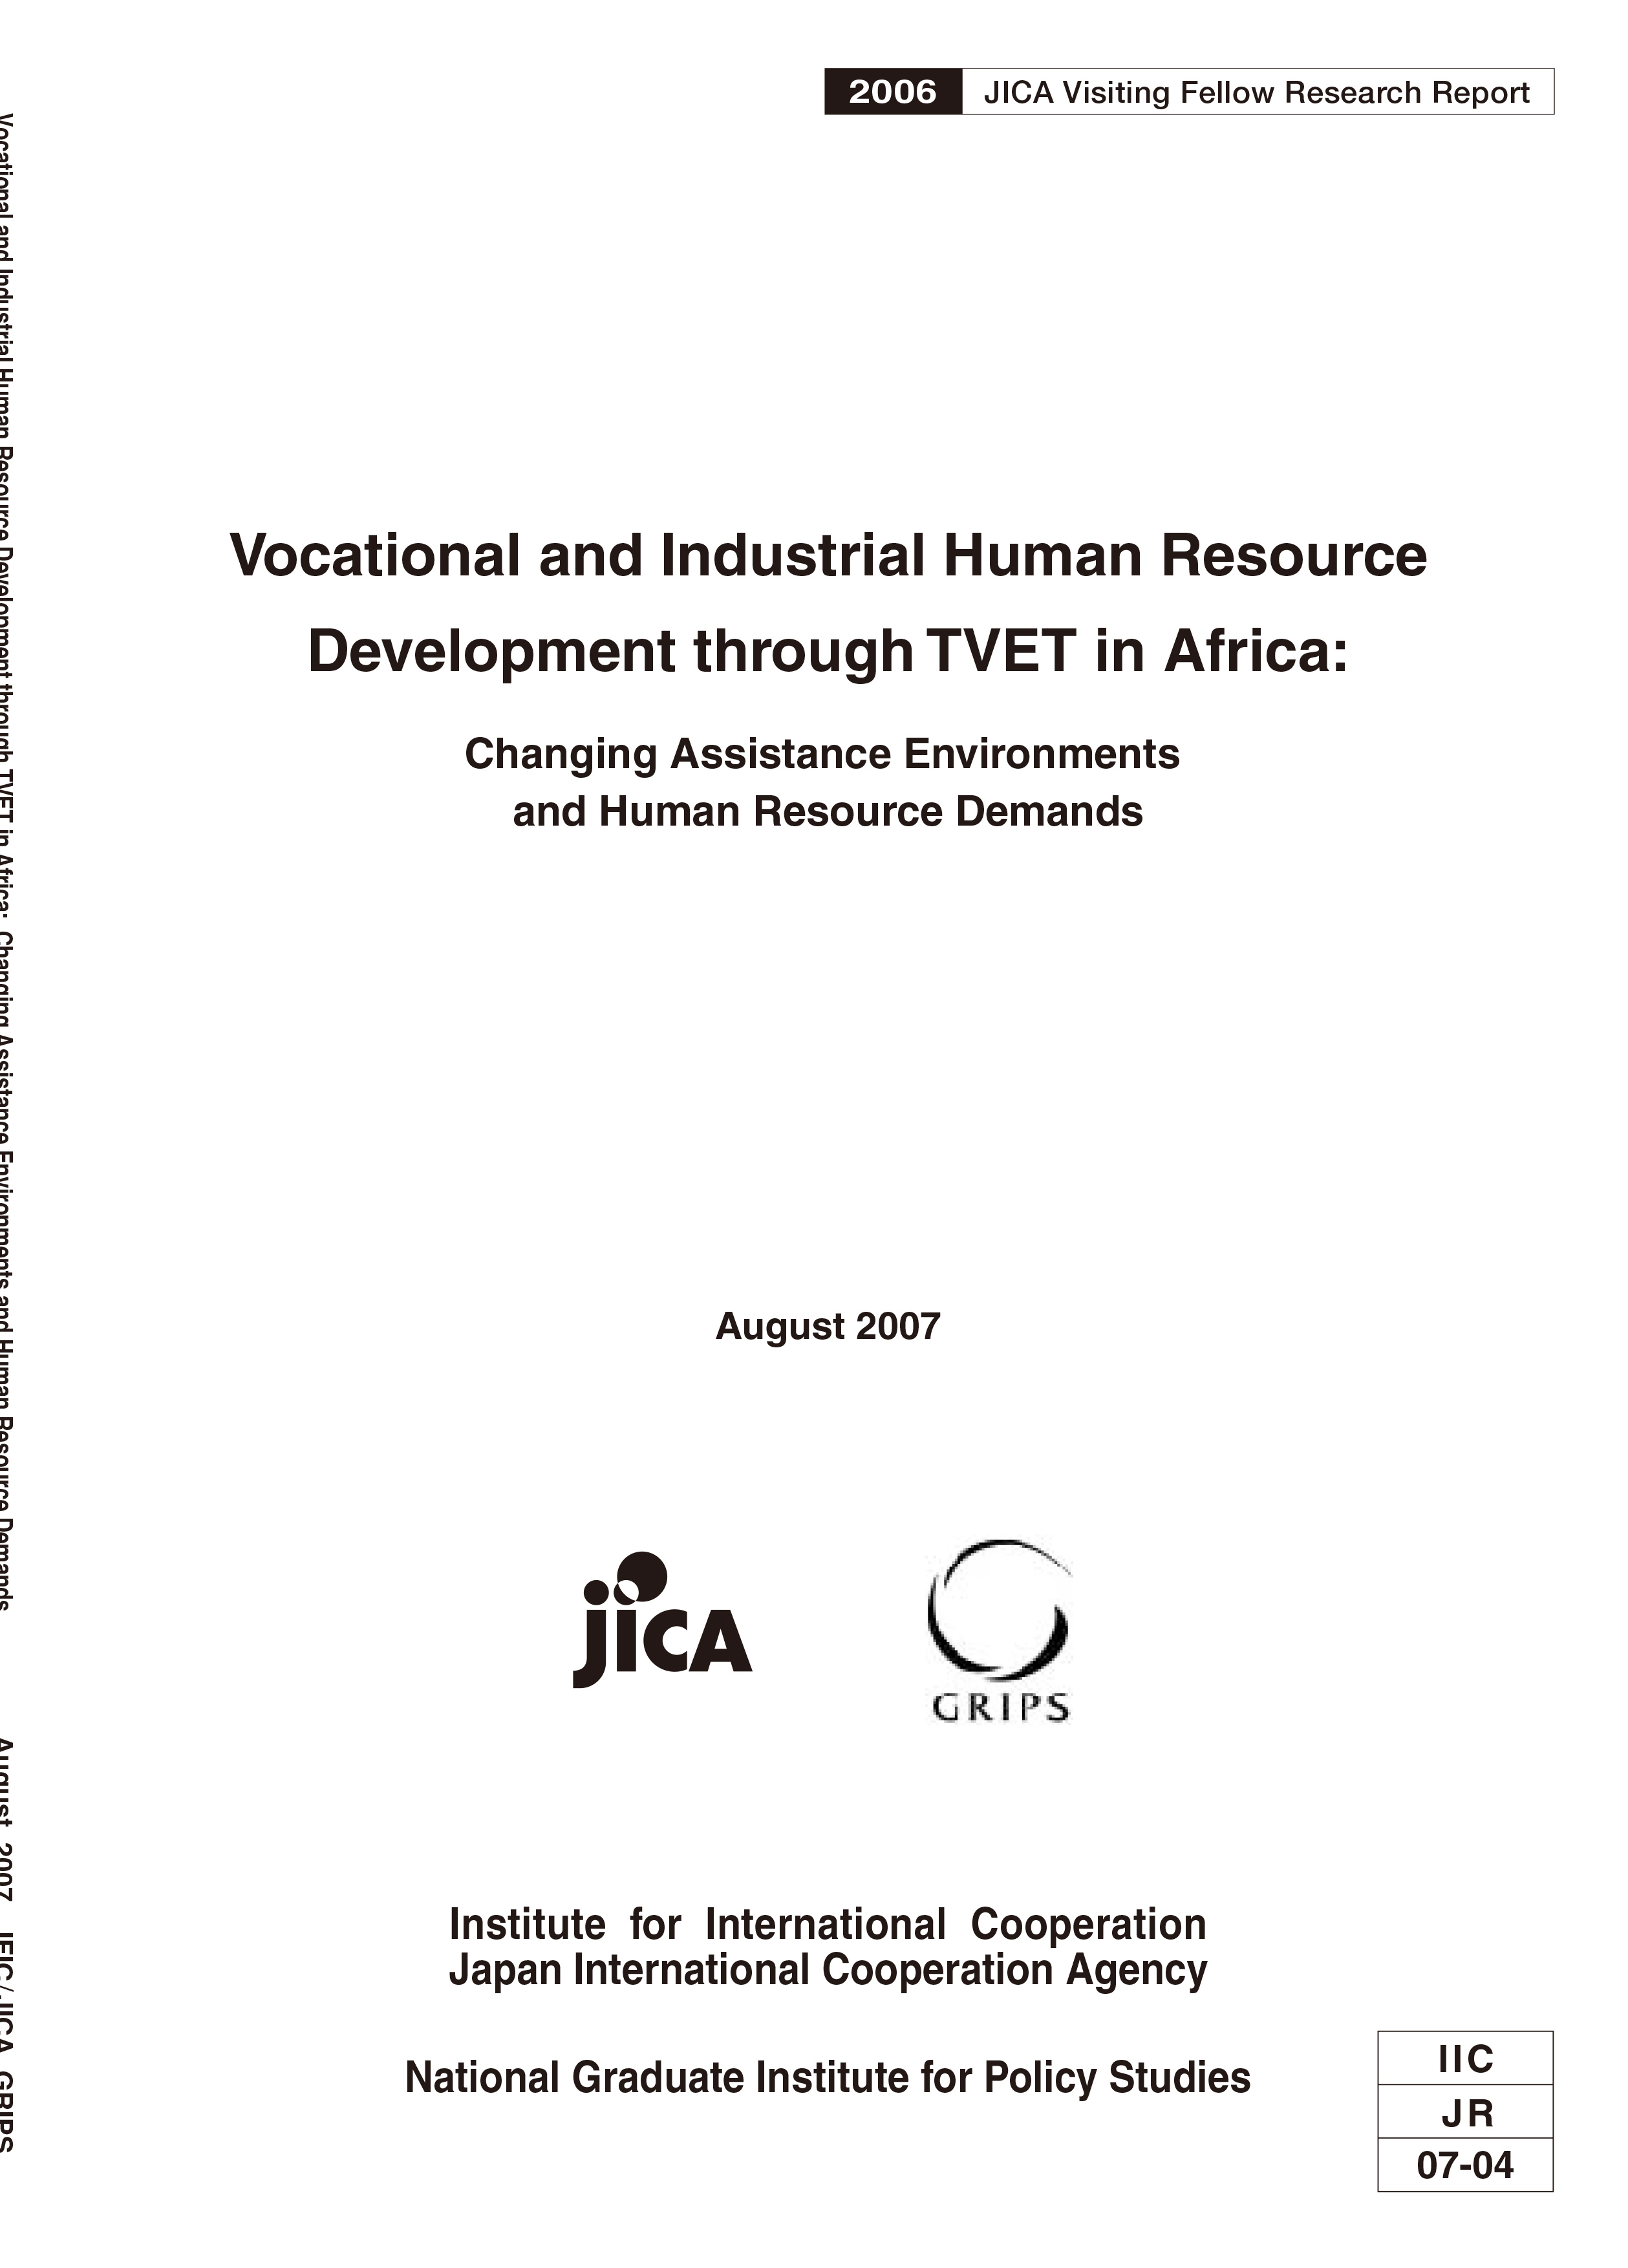 Vocational and Industrial Human Resource Development through TVET in Africa: Changing Assistance Environments and Human Resource Demands. 